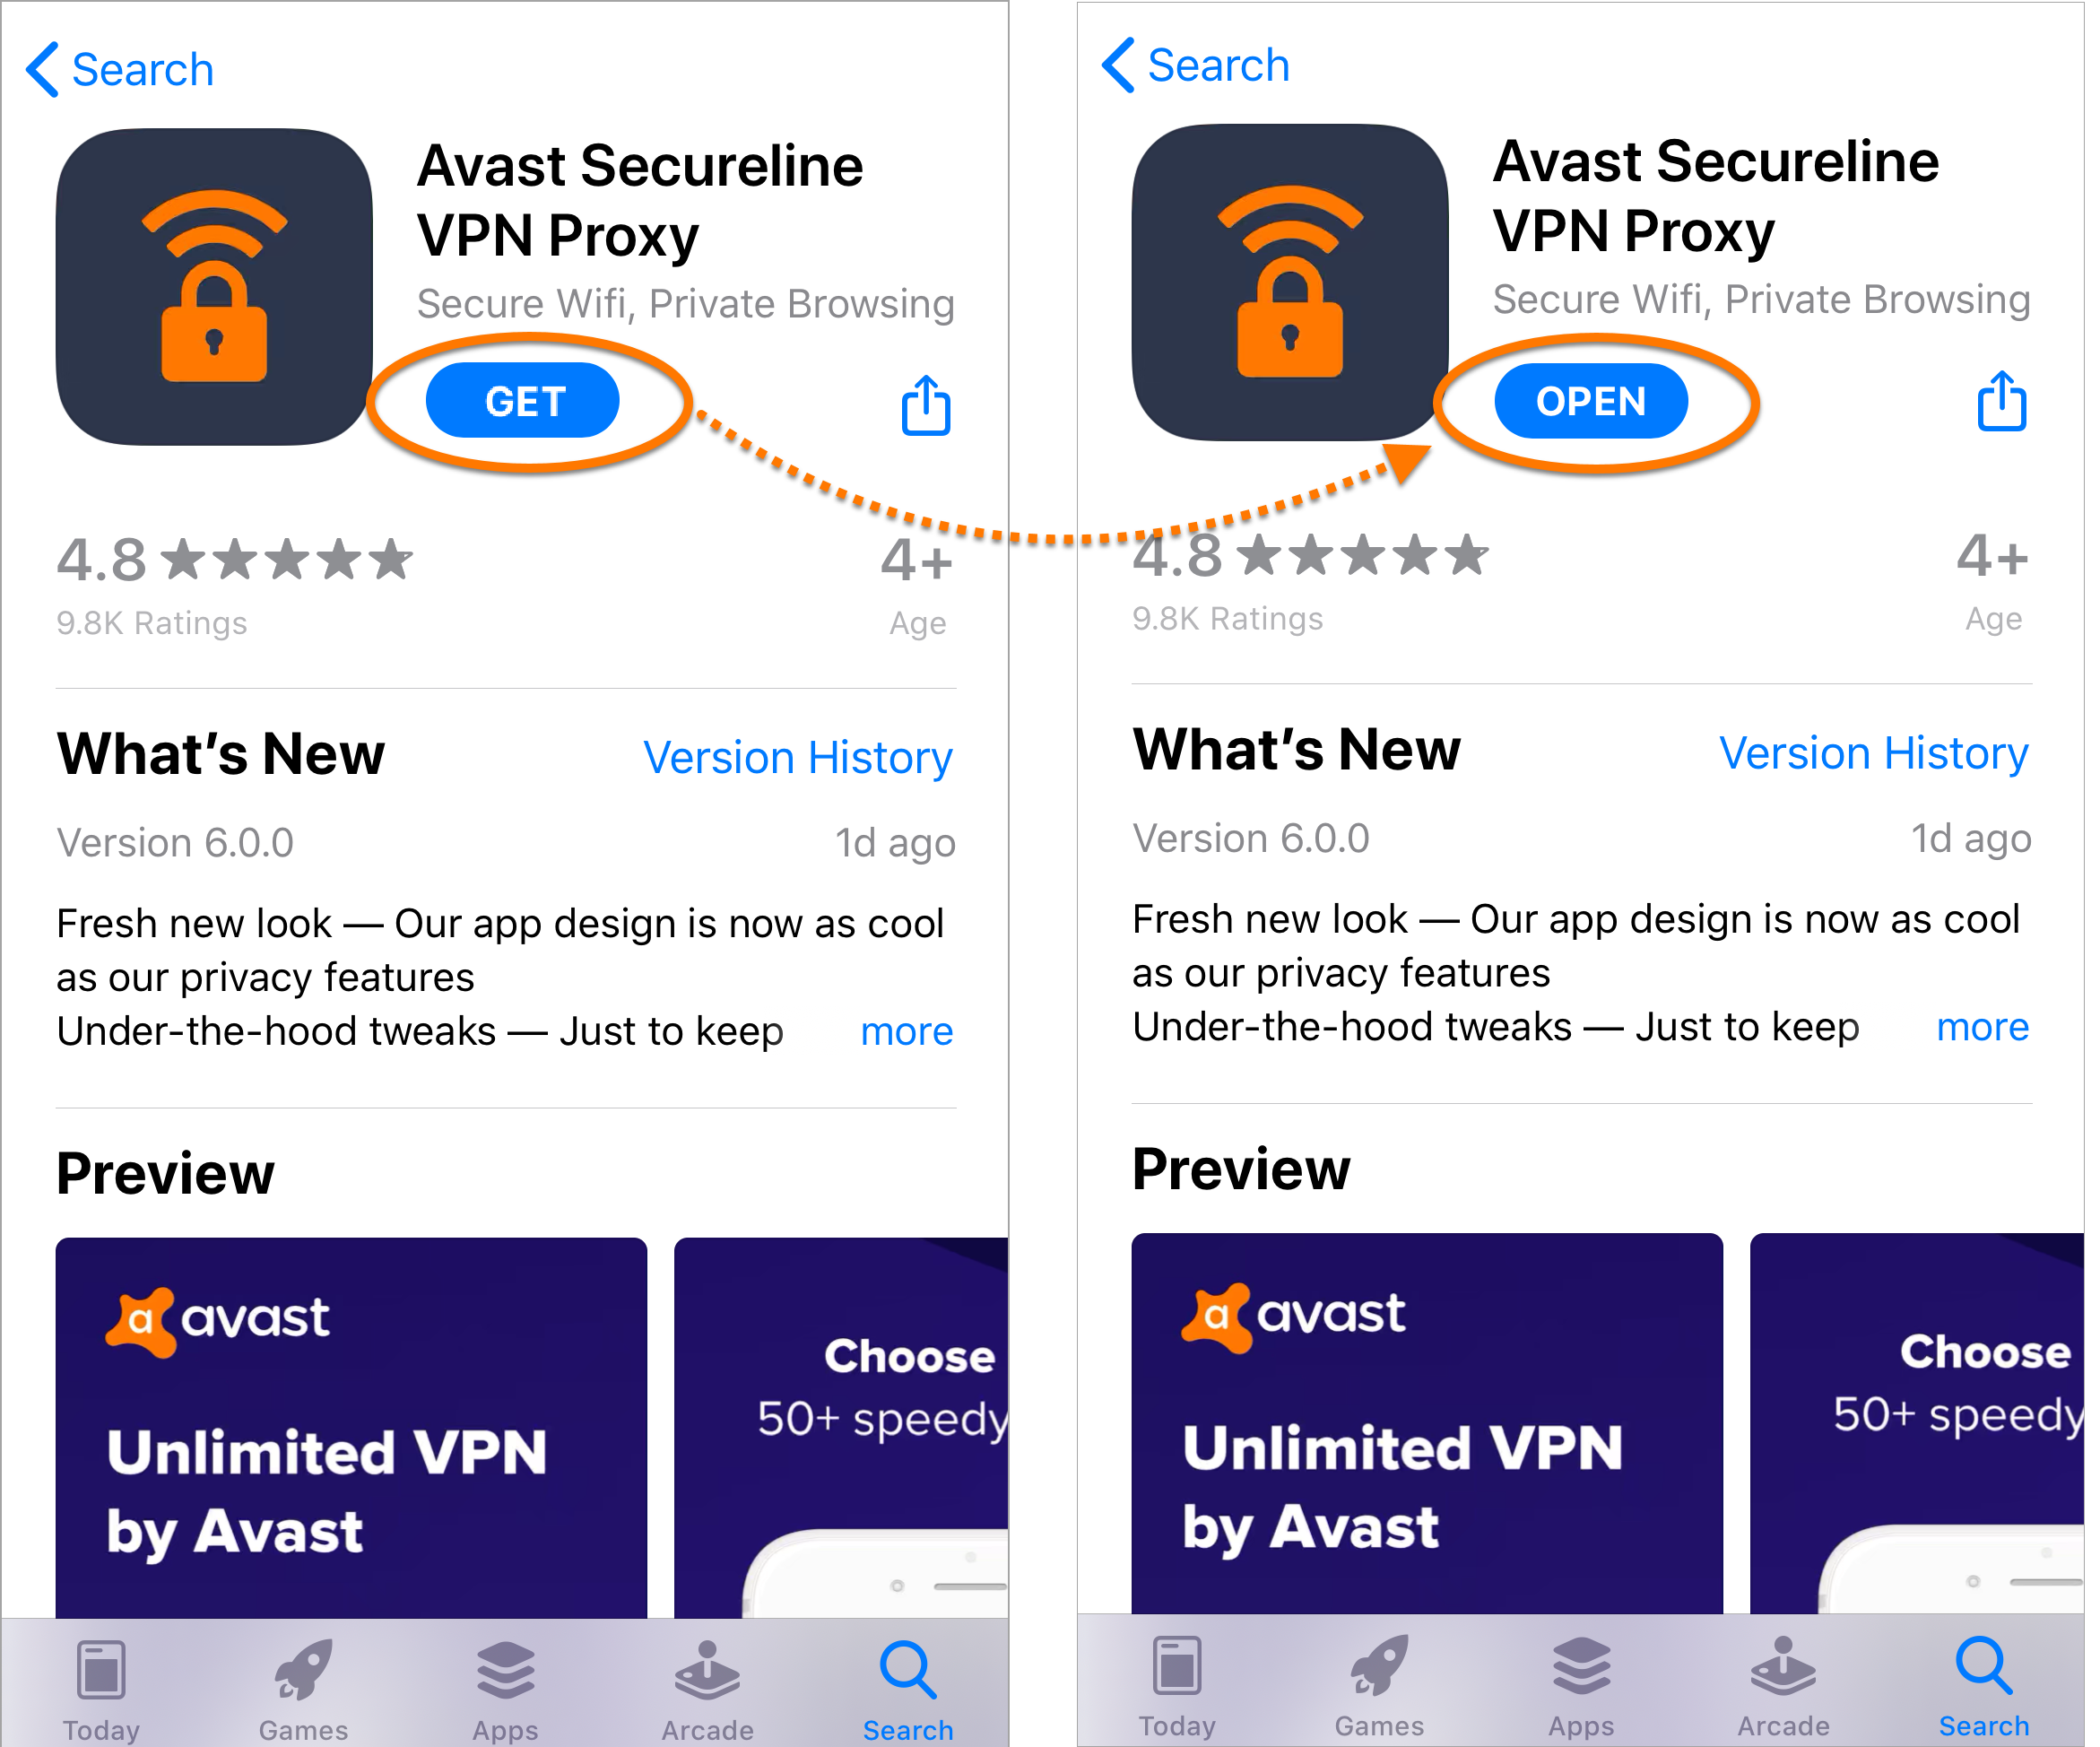 check point vpn endpoint security